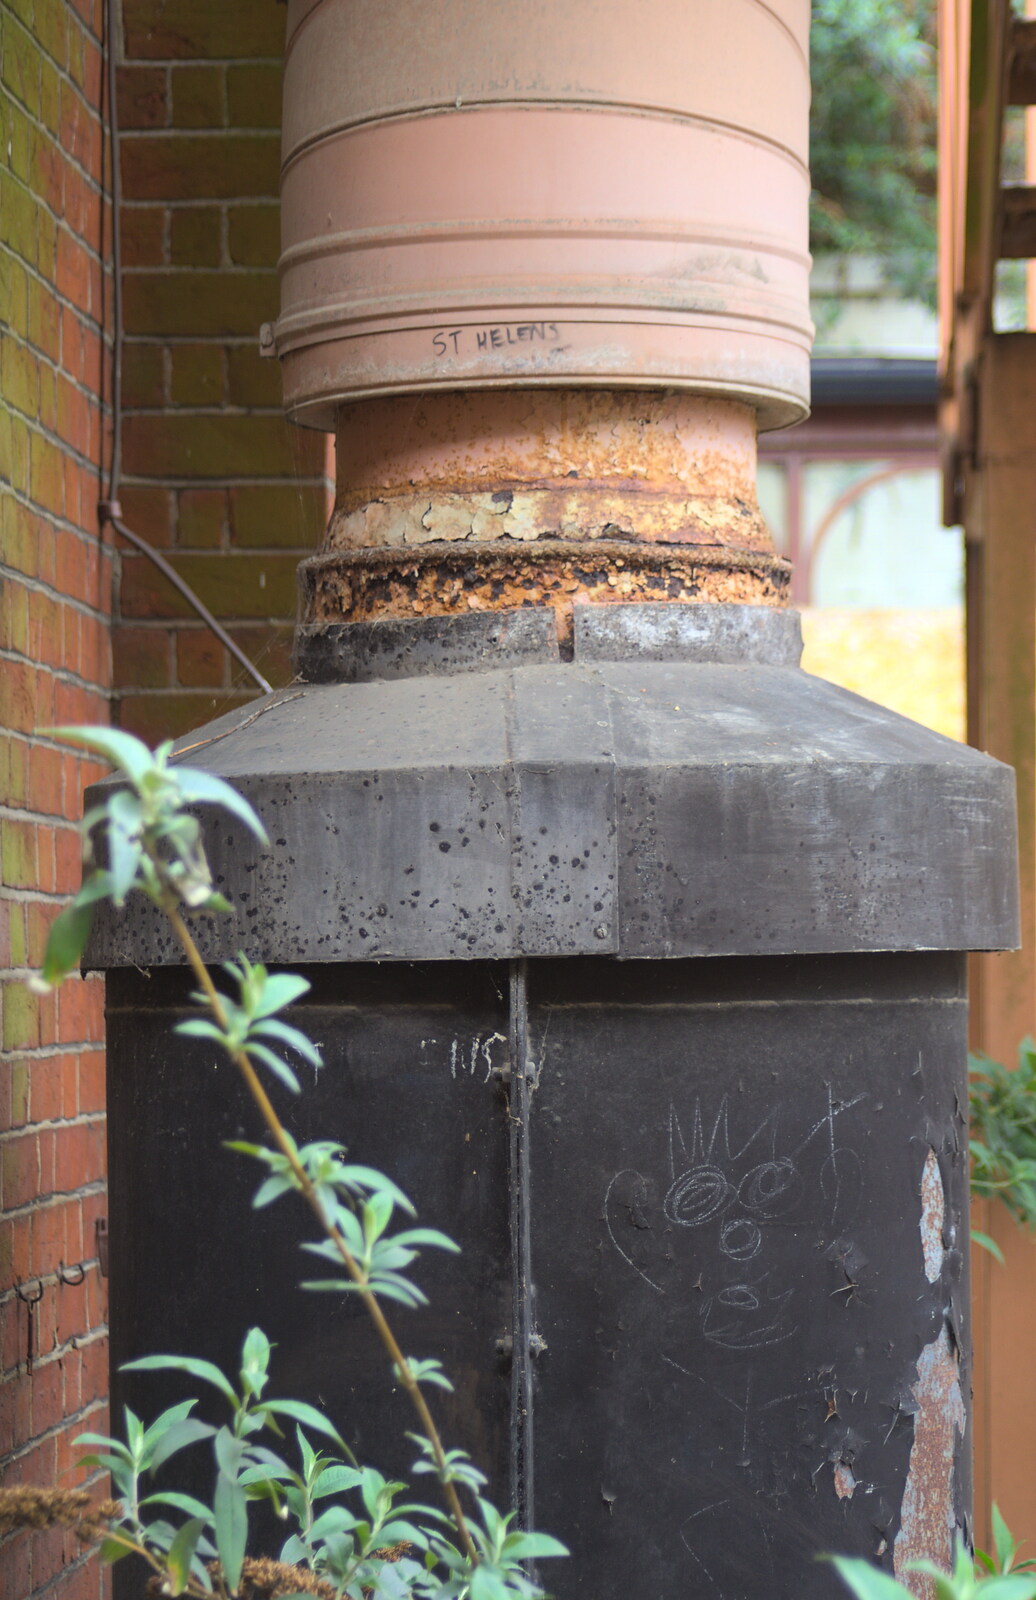 A furnace chimney with 'St Helens' on it from The Dereliction of Suffolk County Council, Ipswich, Suffolk - 3rd April 2012